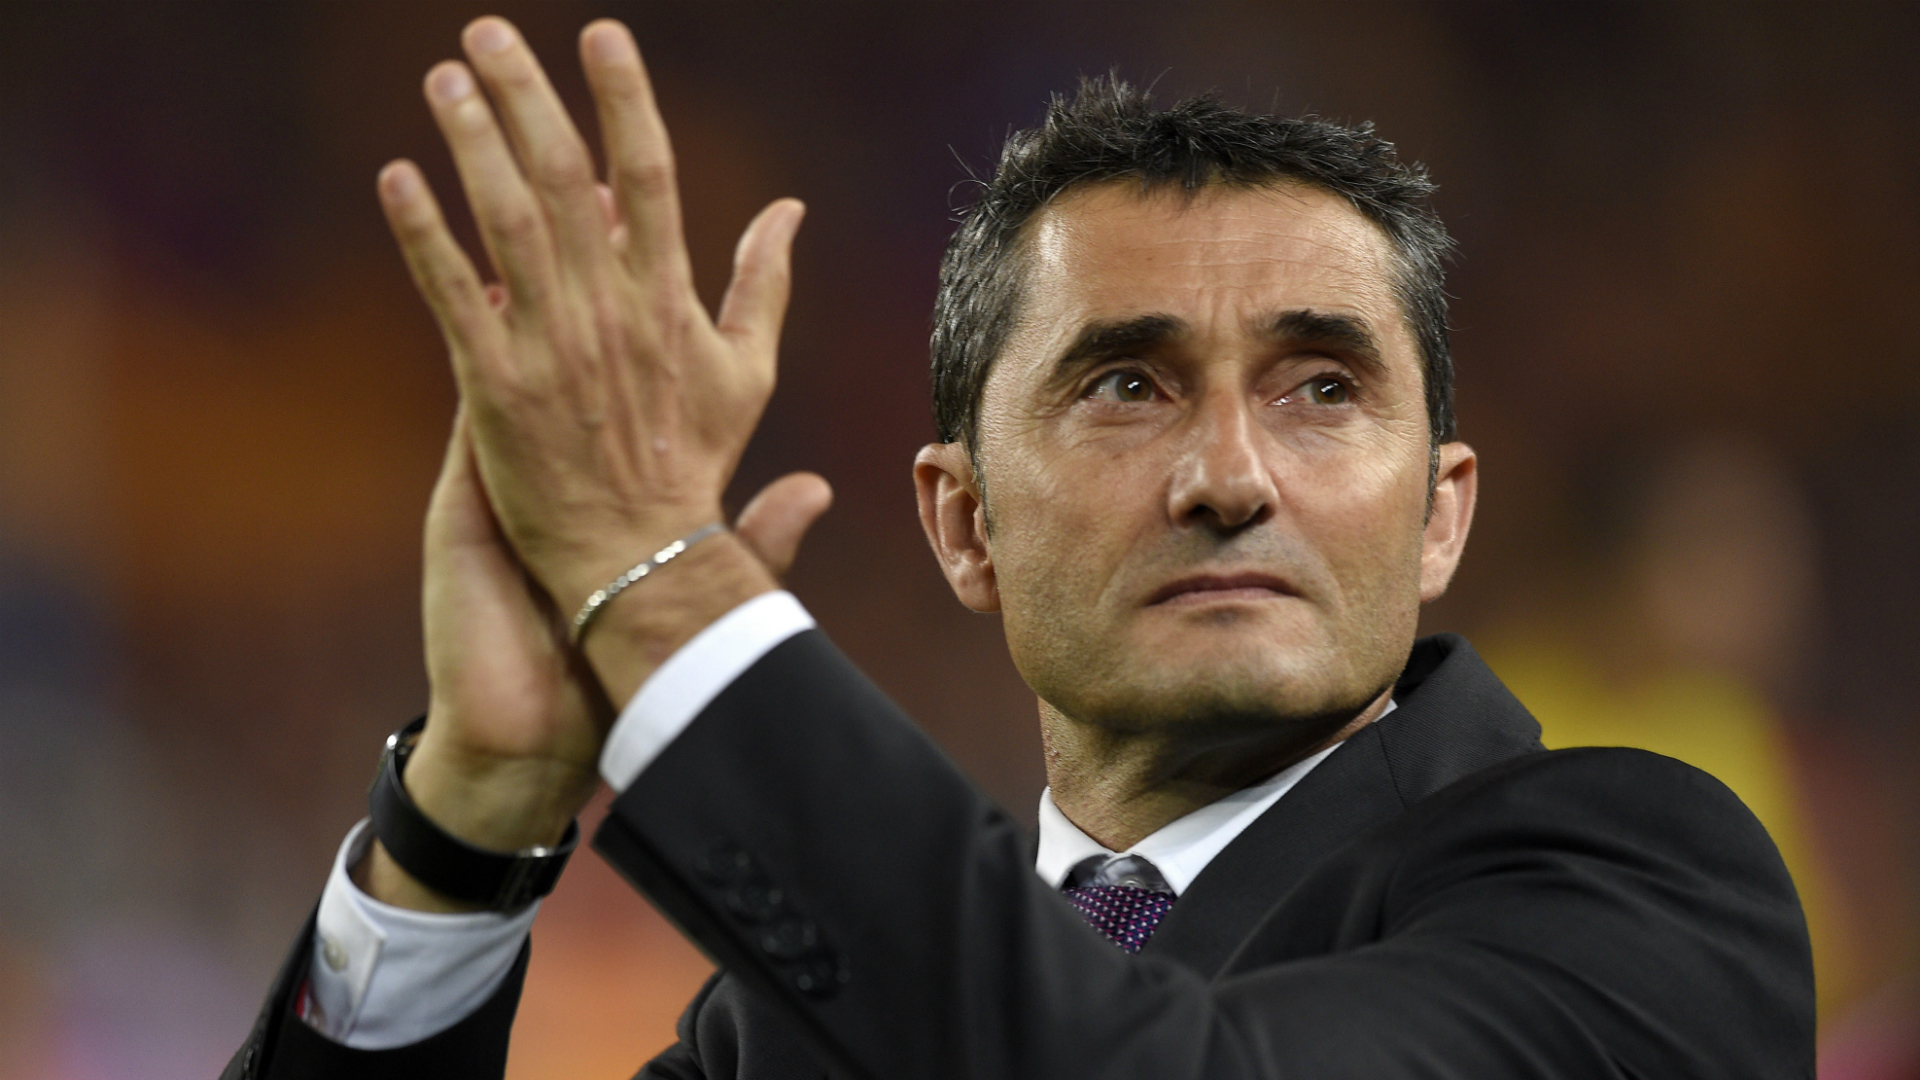 Ernesto Valverde is the new Barcelona manager